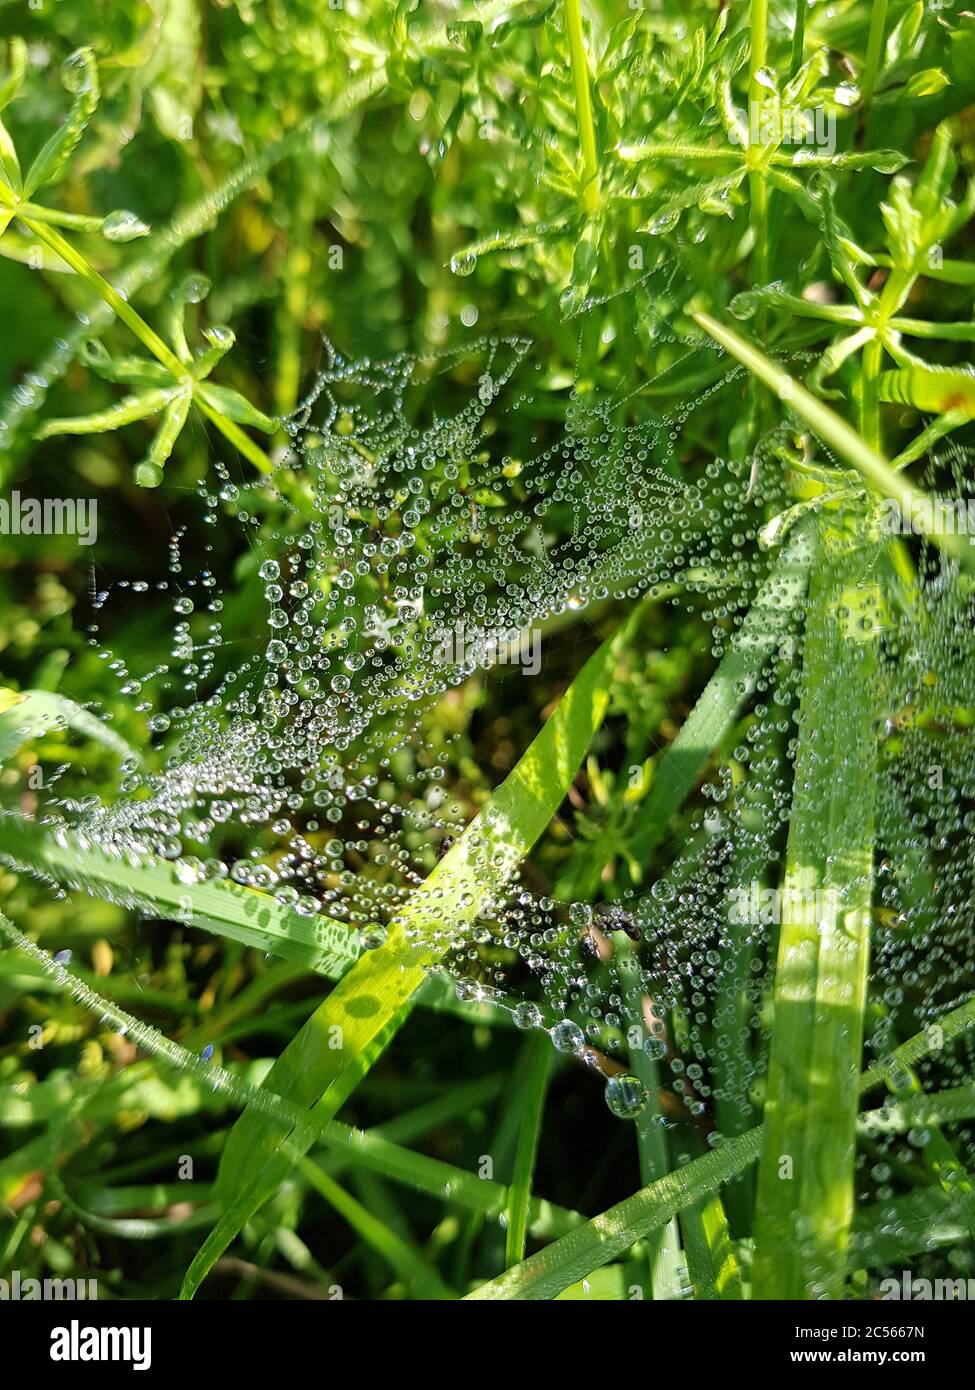 Spider web in the grass with dew drops Stock Photo